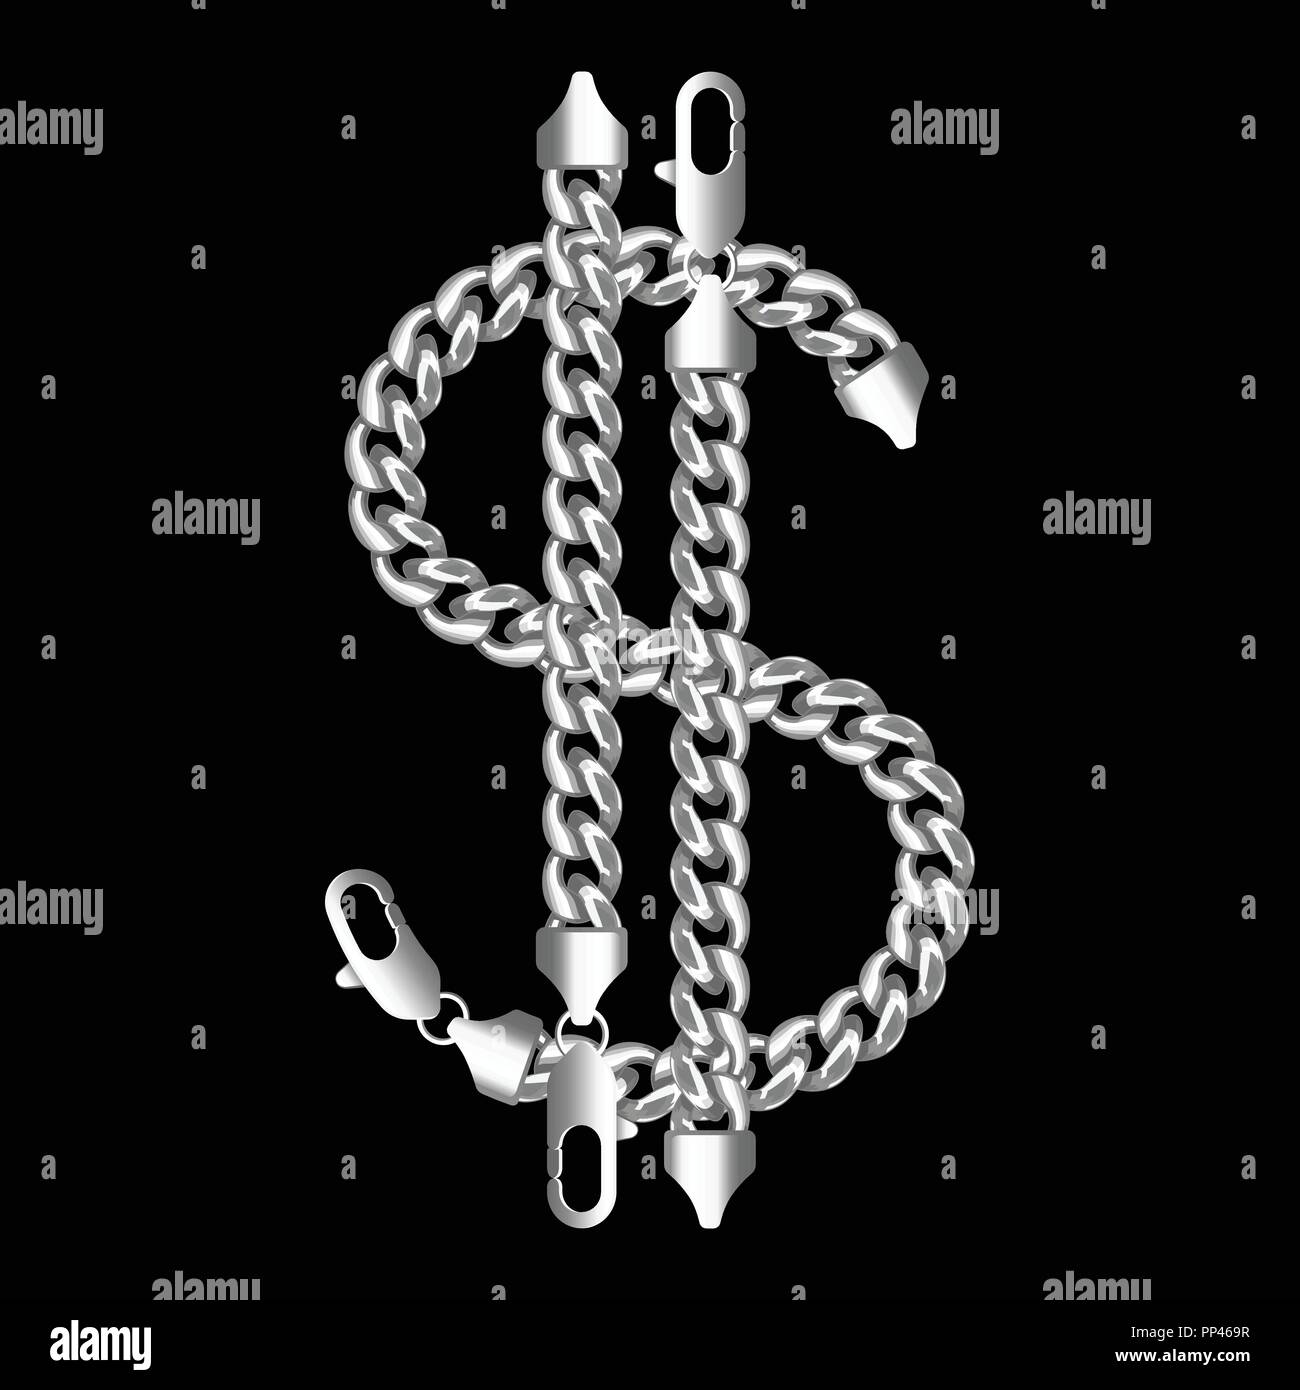 Silver american dollar money sign made of shiny thick golden chain. Stock Vector